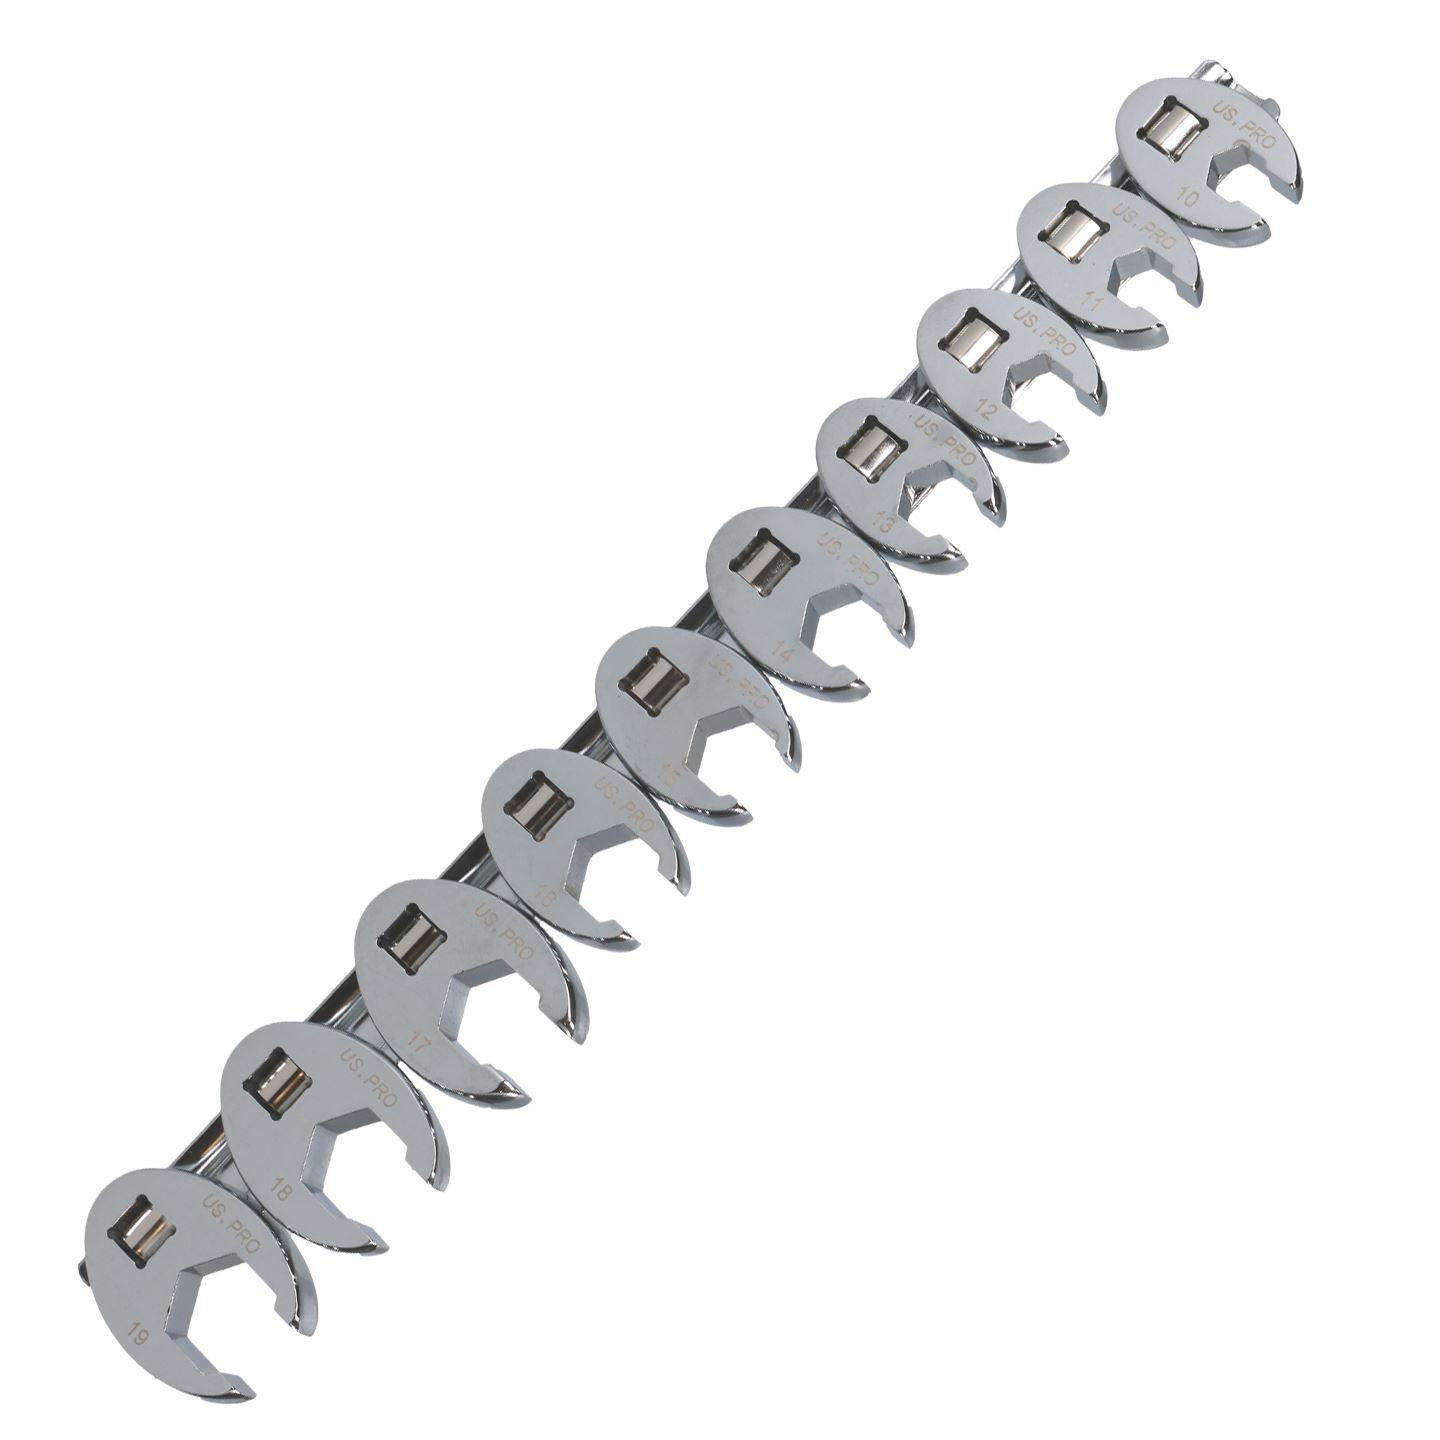 Metric Crowfoot Wrench 3/8" Drive Crows Feet Spanner for Torque Wrenches